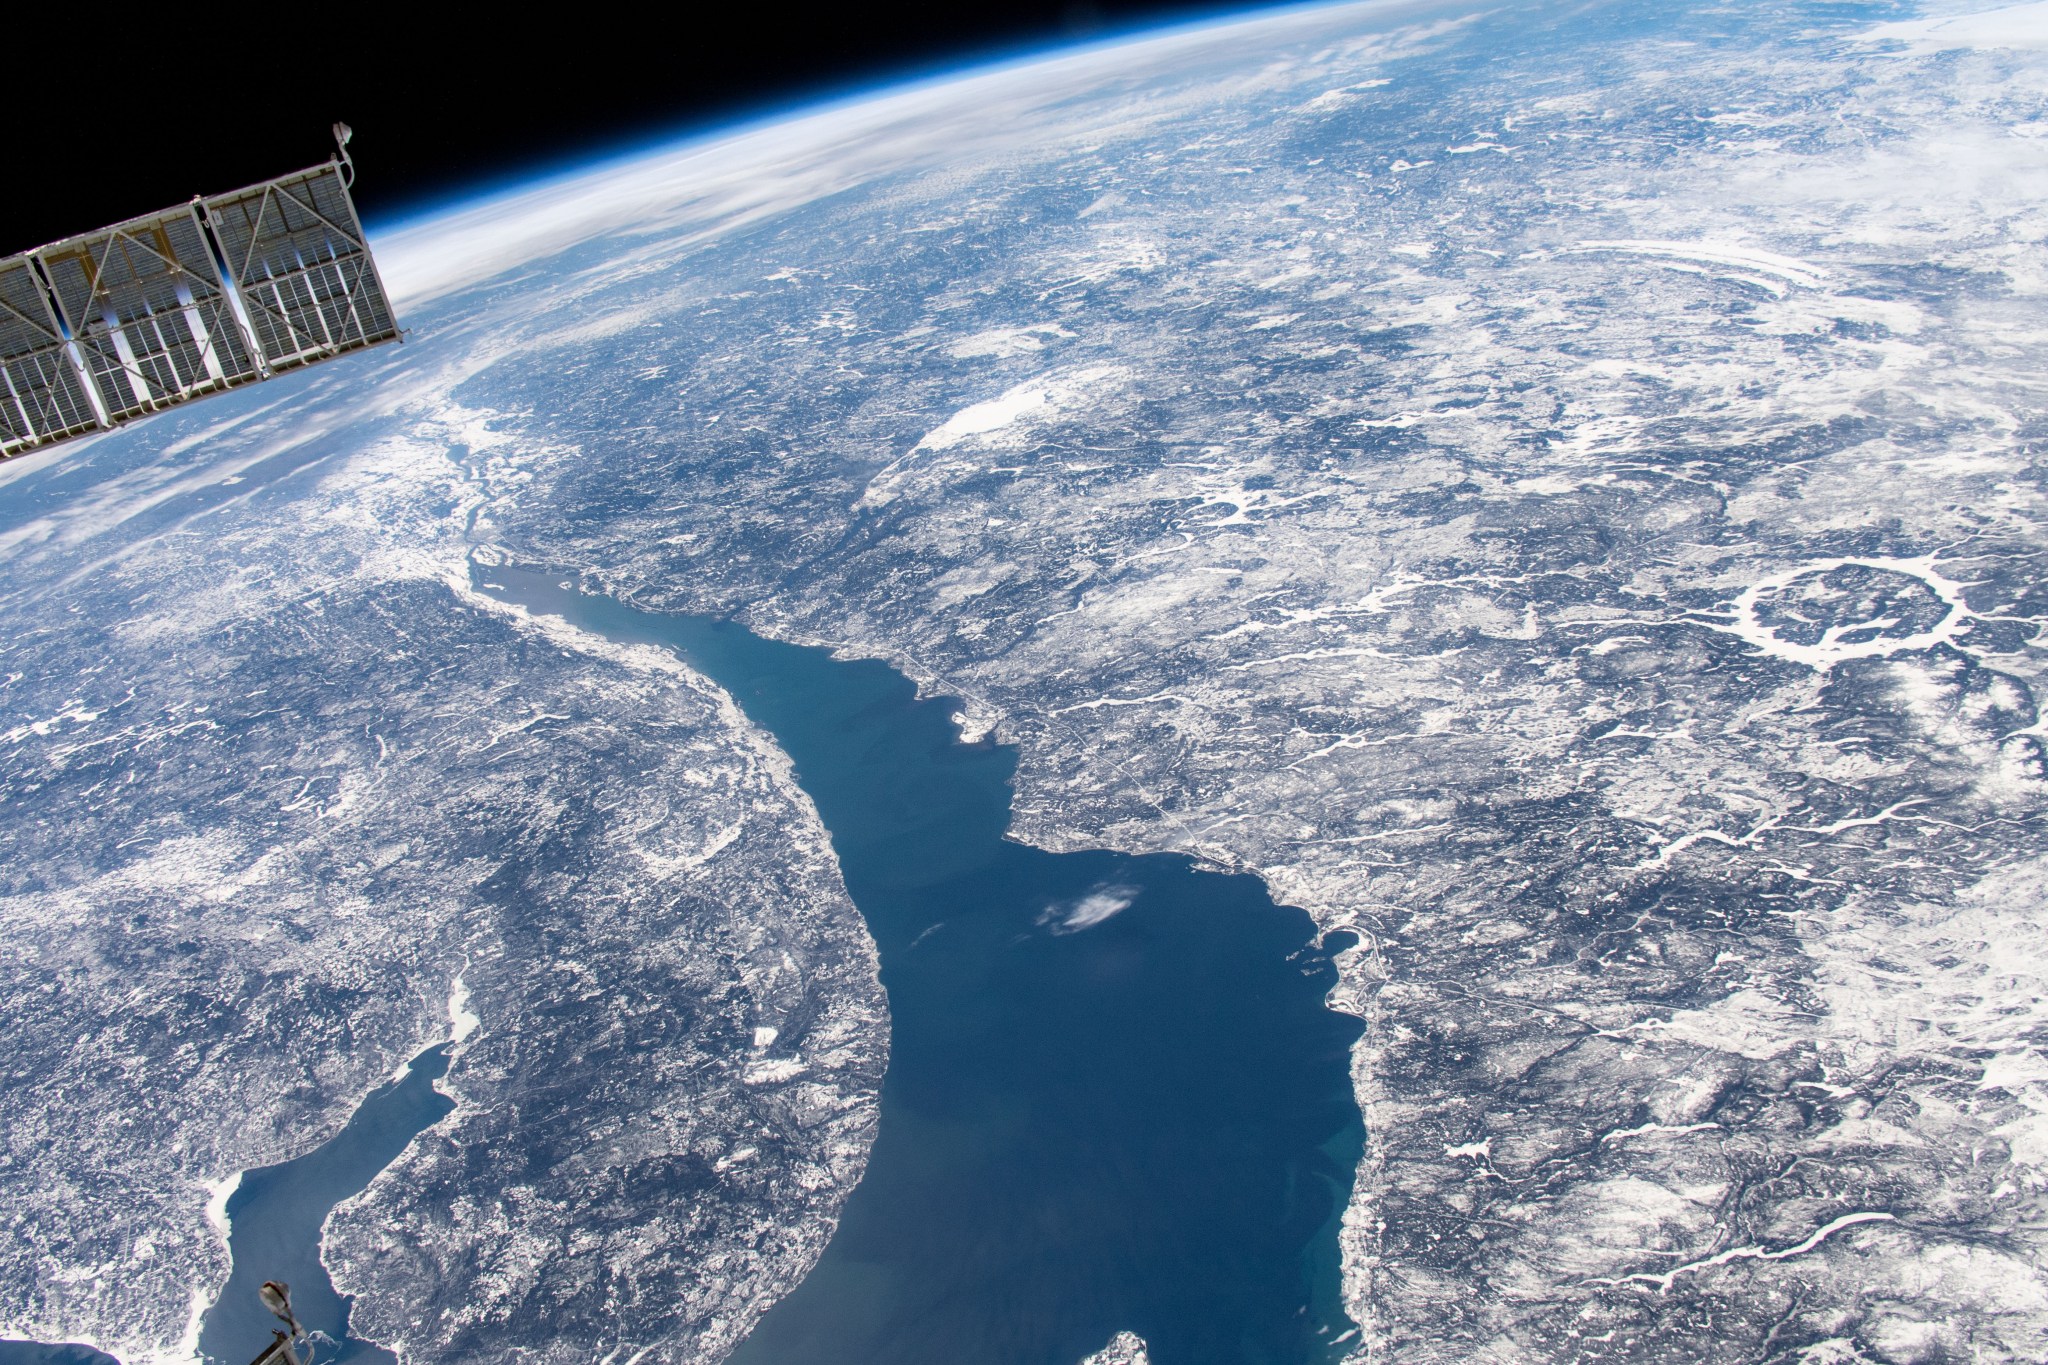 The Manicouagan Crater as taken by ISS